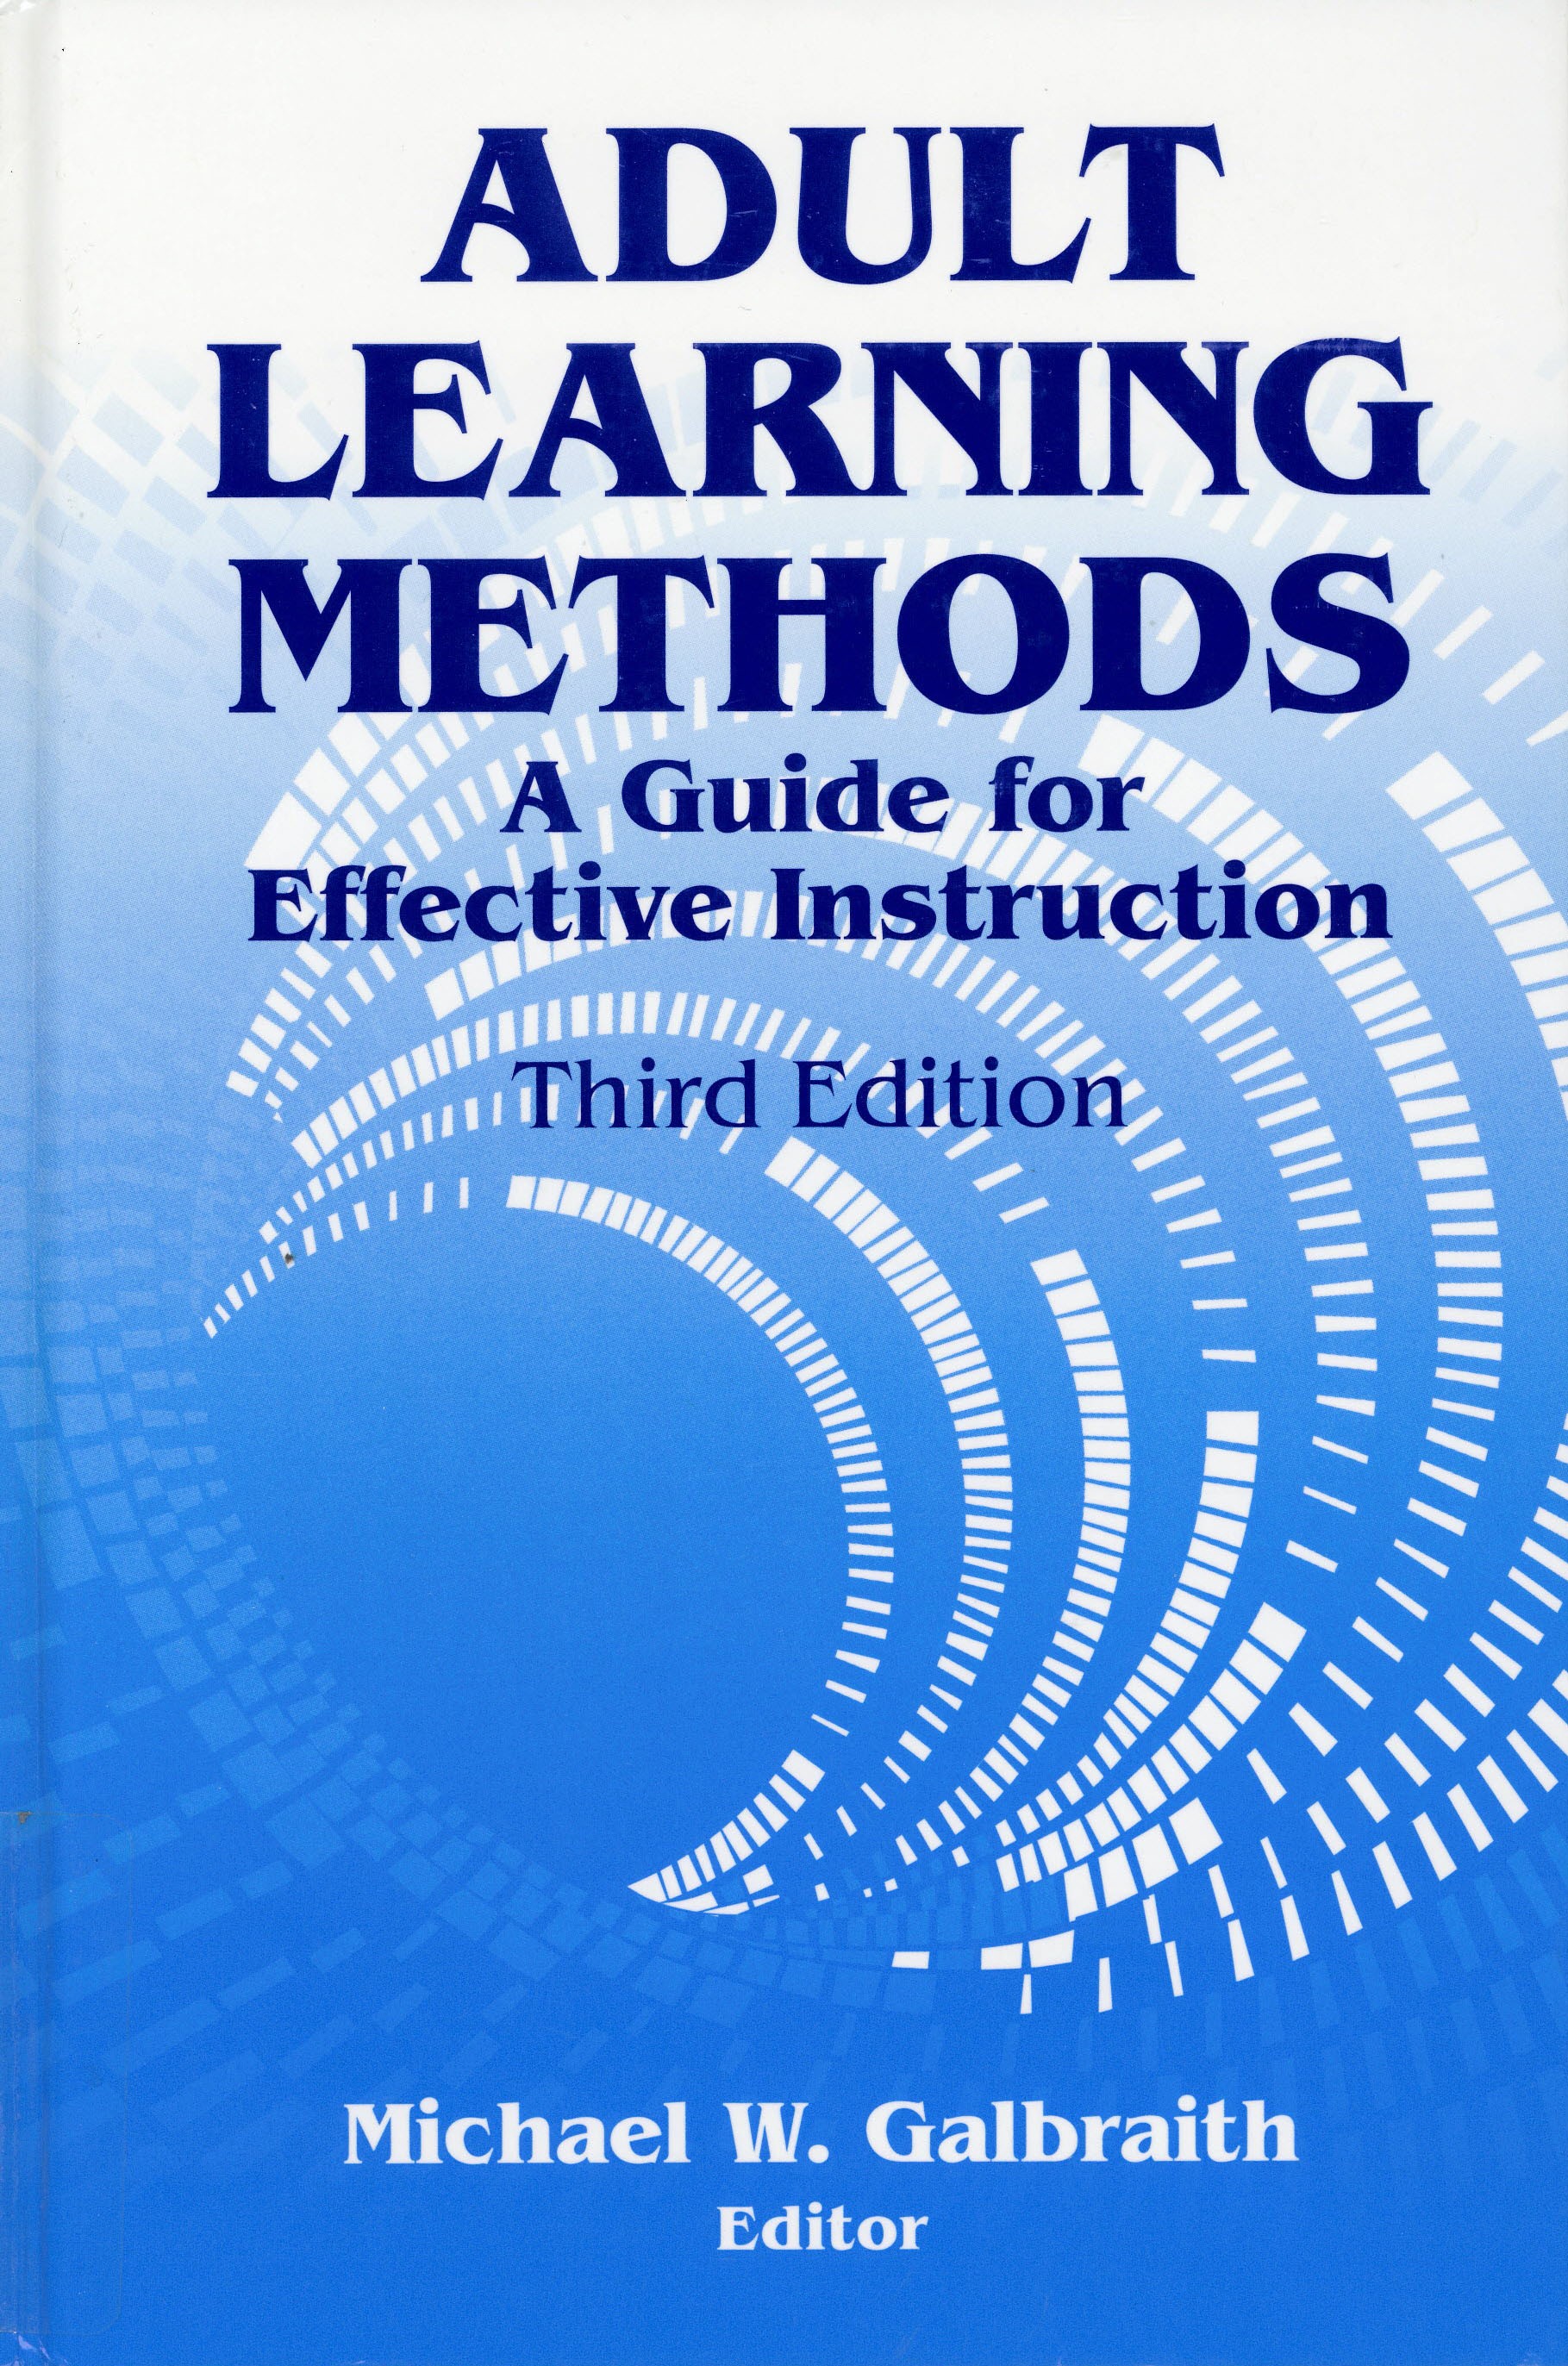 Adult learning methods : a guide for effective instruction